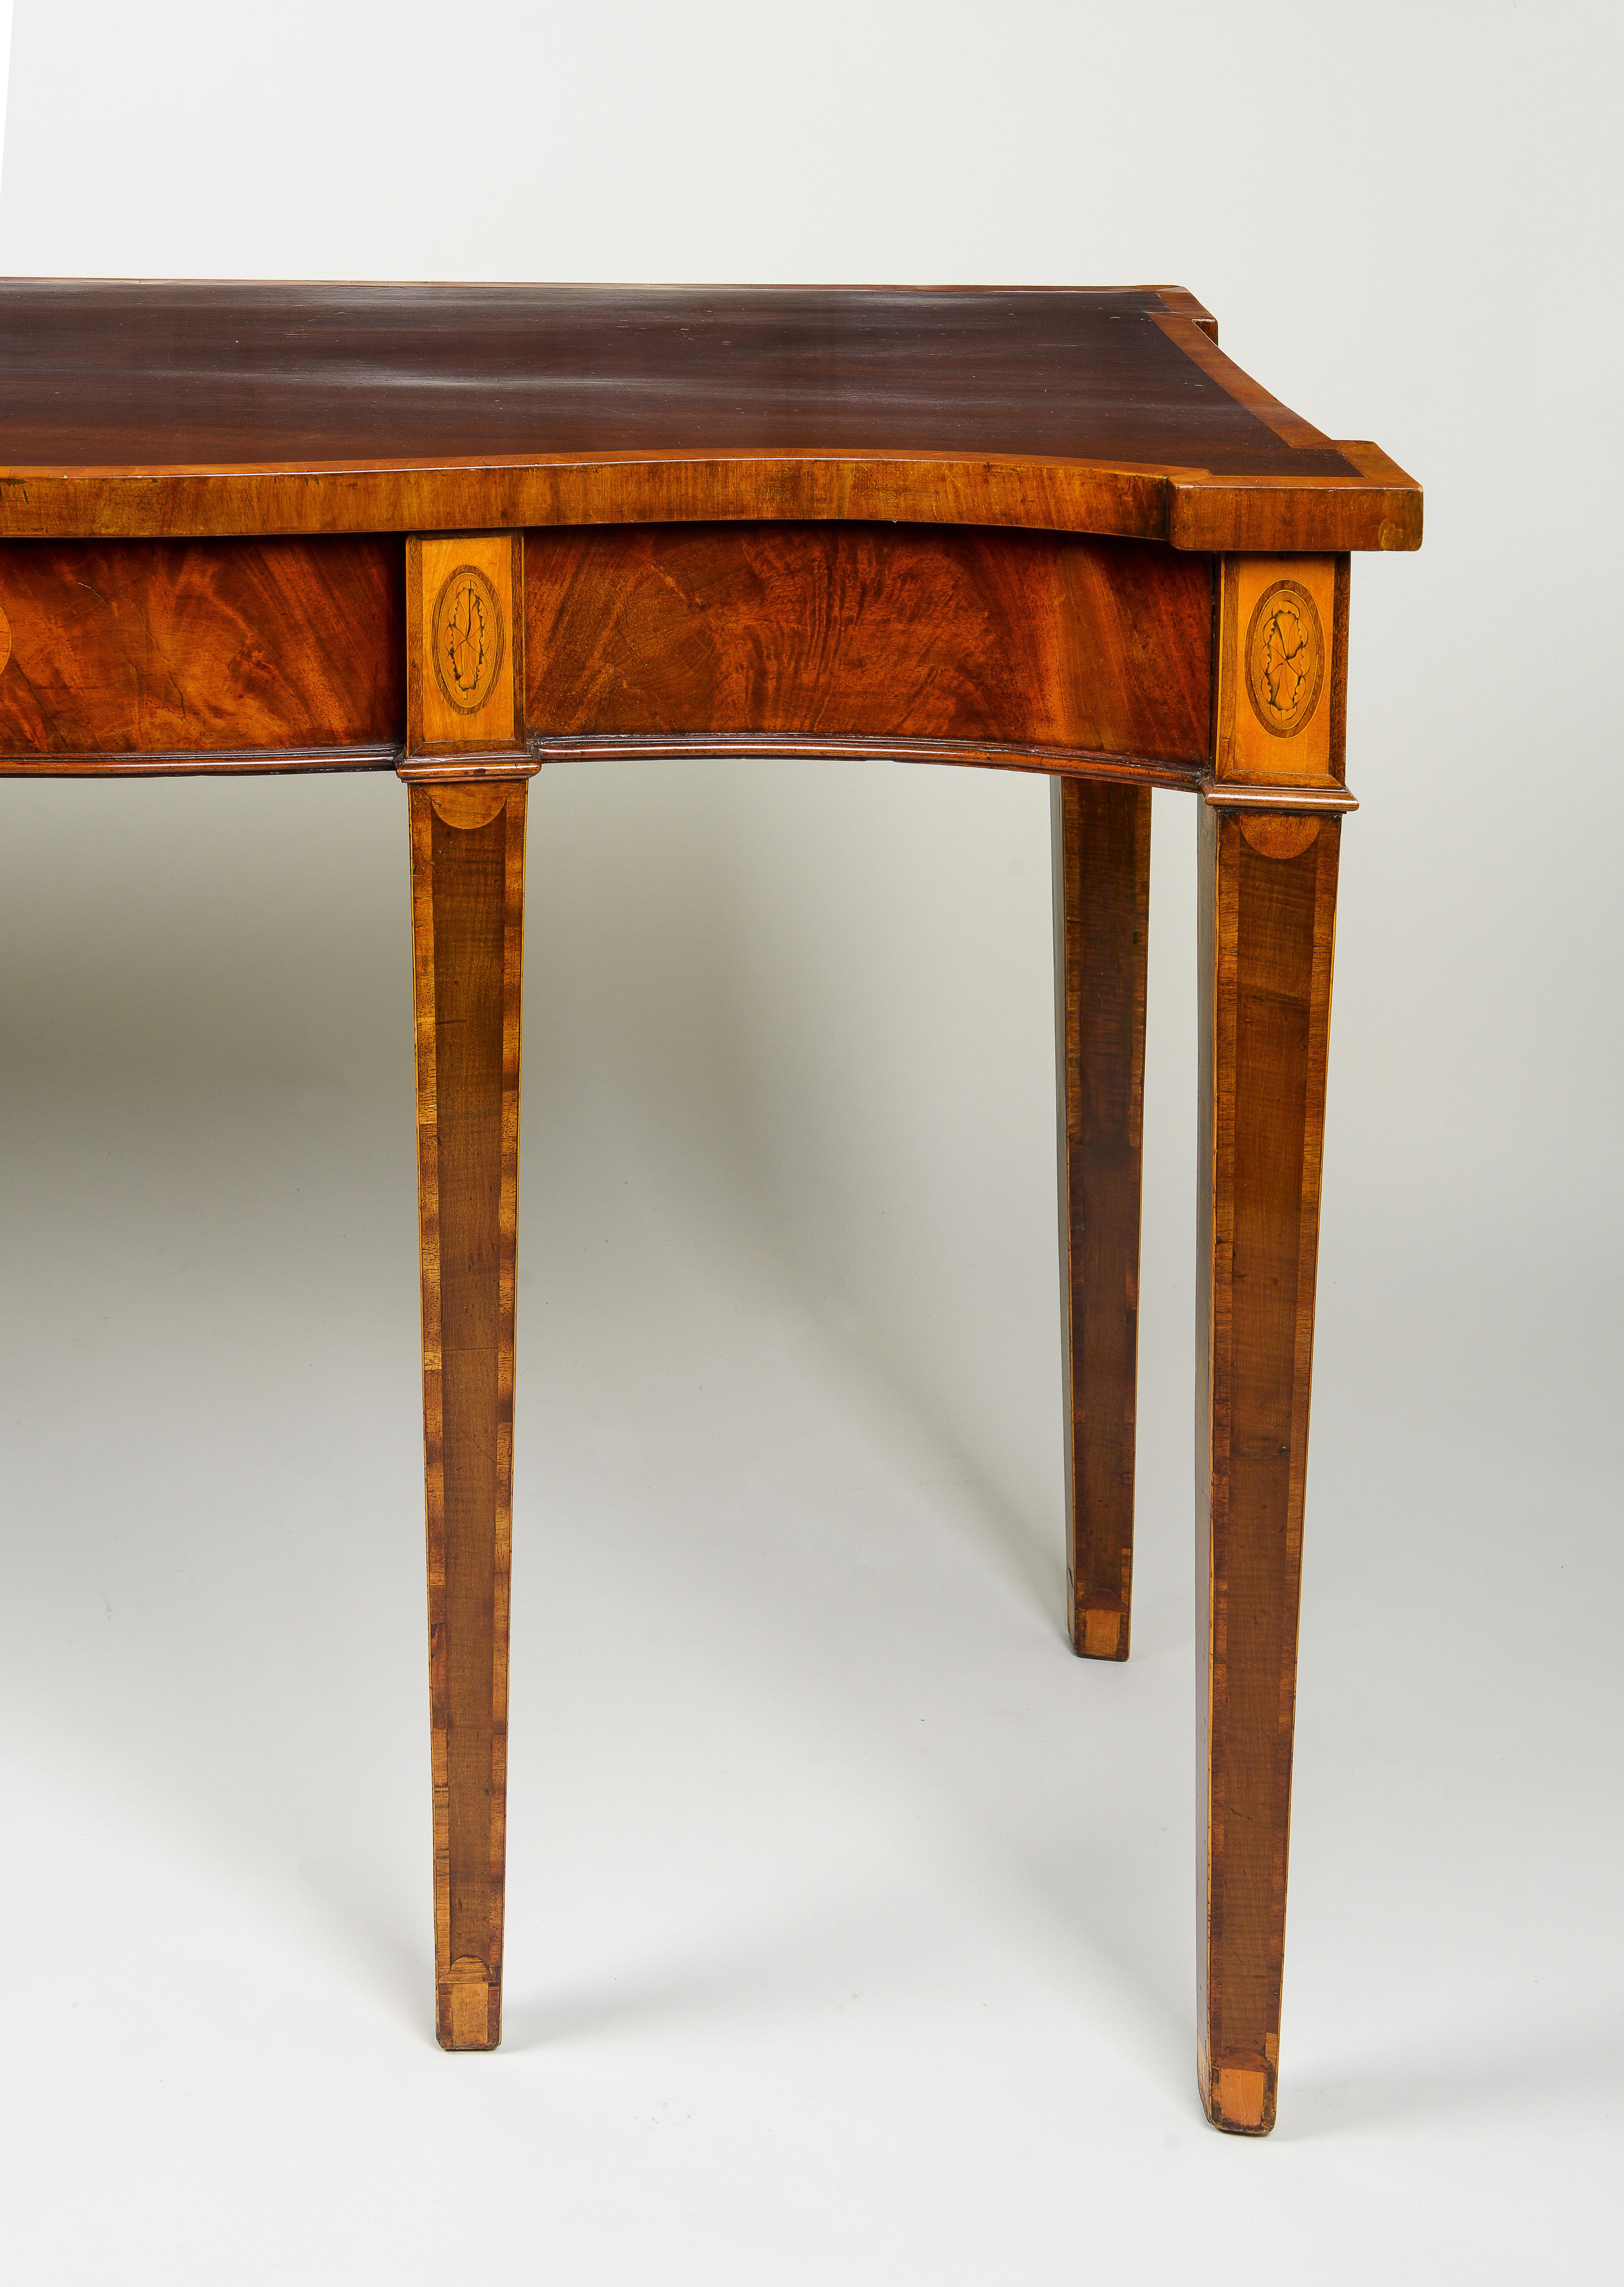 Fine George III Mahogany and Satinwood-Inlaid Serpentine Serving Table For Sale 2